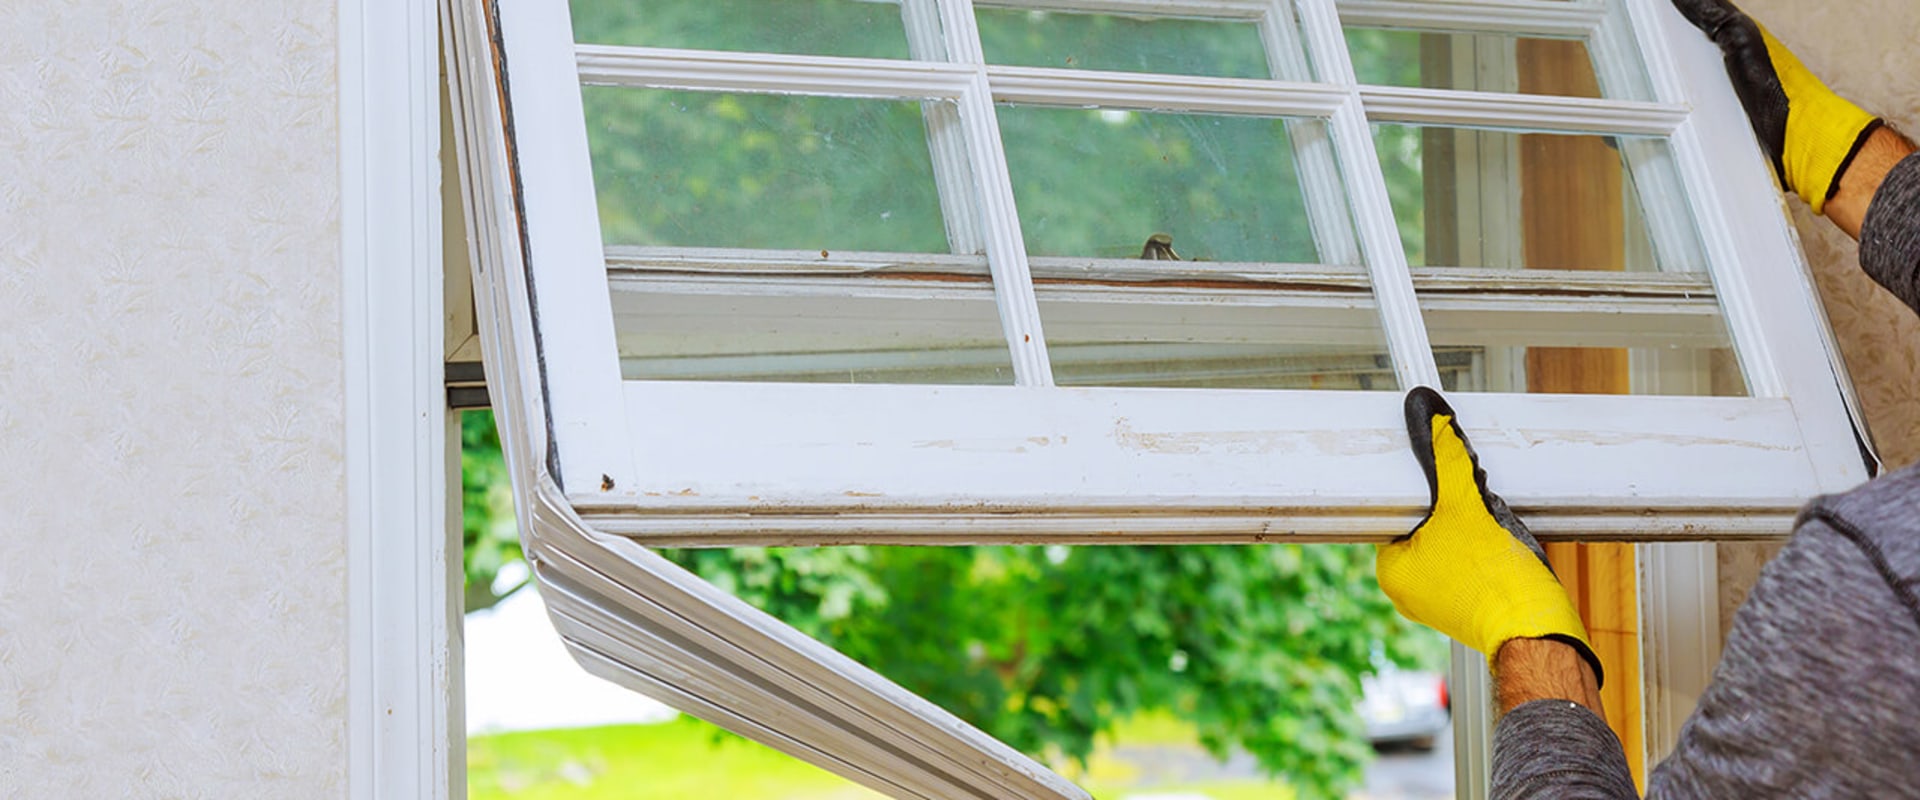 Can Home Windows Be Repaired? - An Expert's Guide